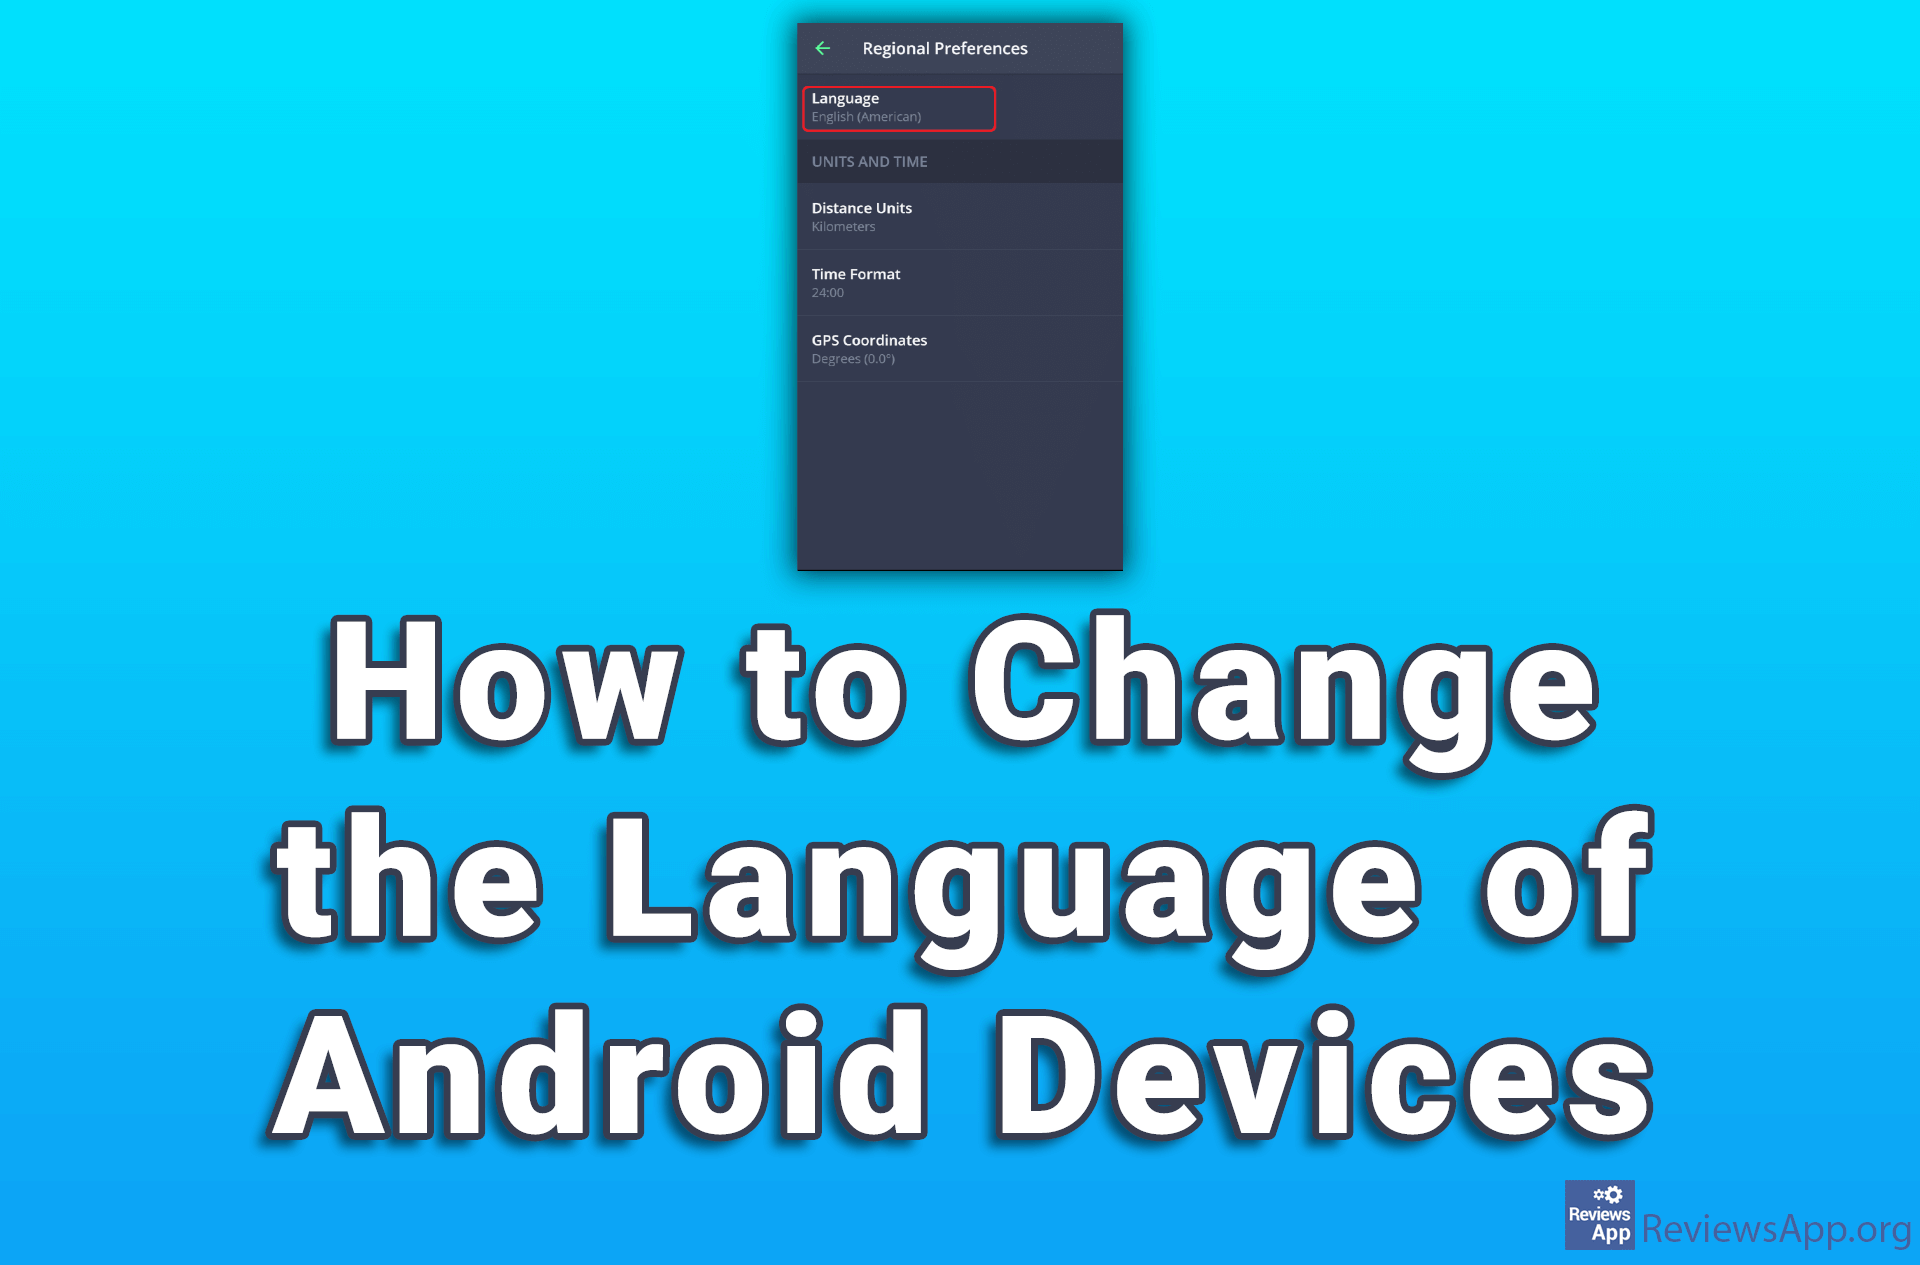 How to Change the Language of Android Devices